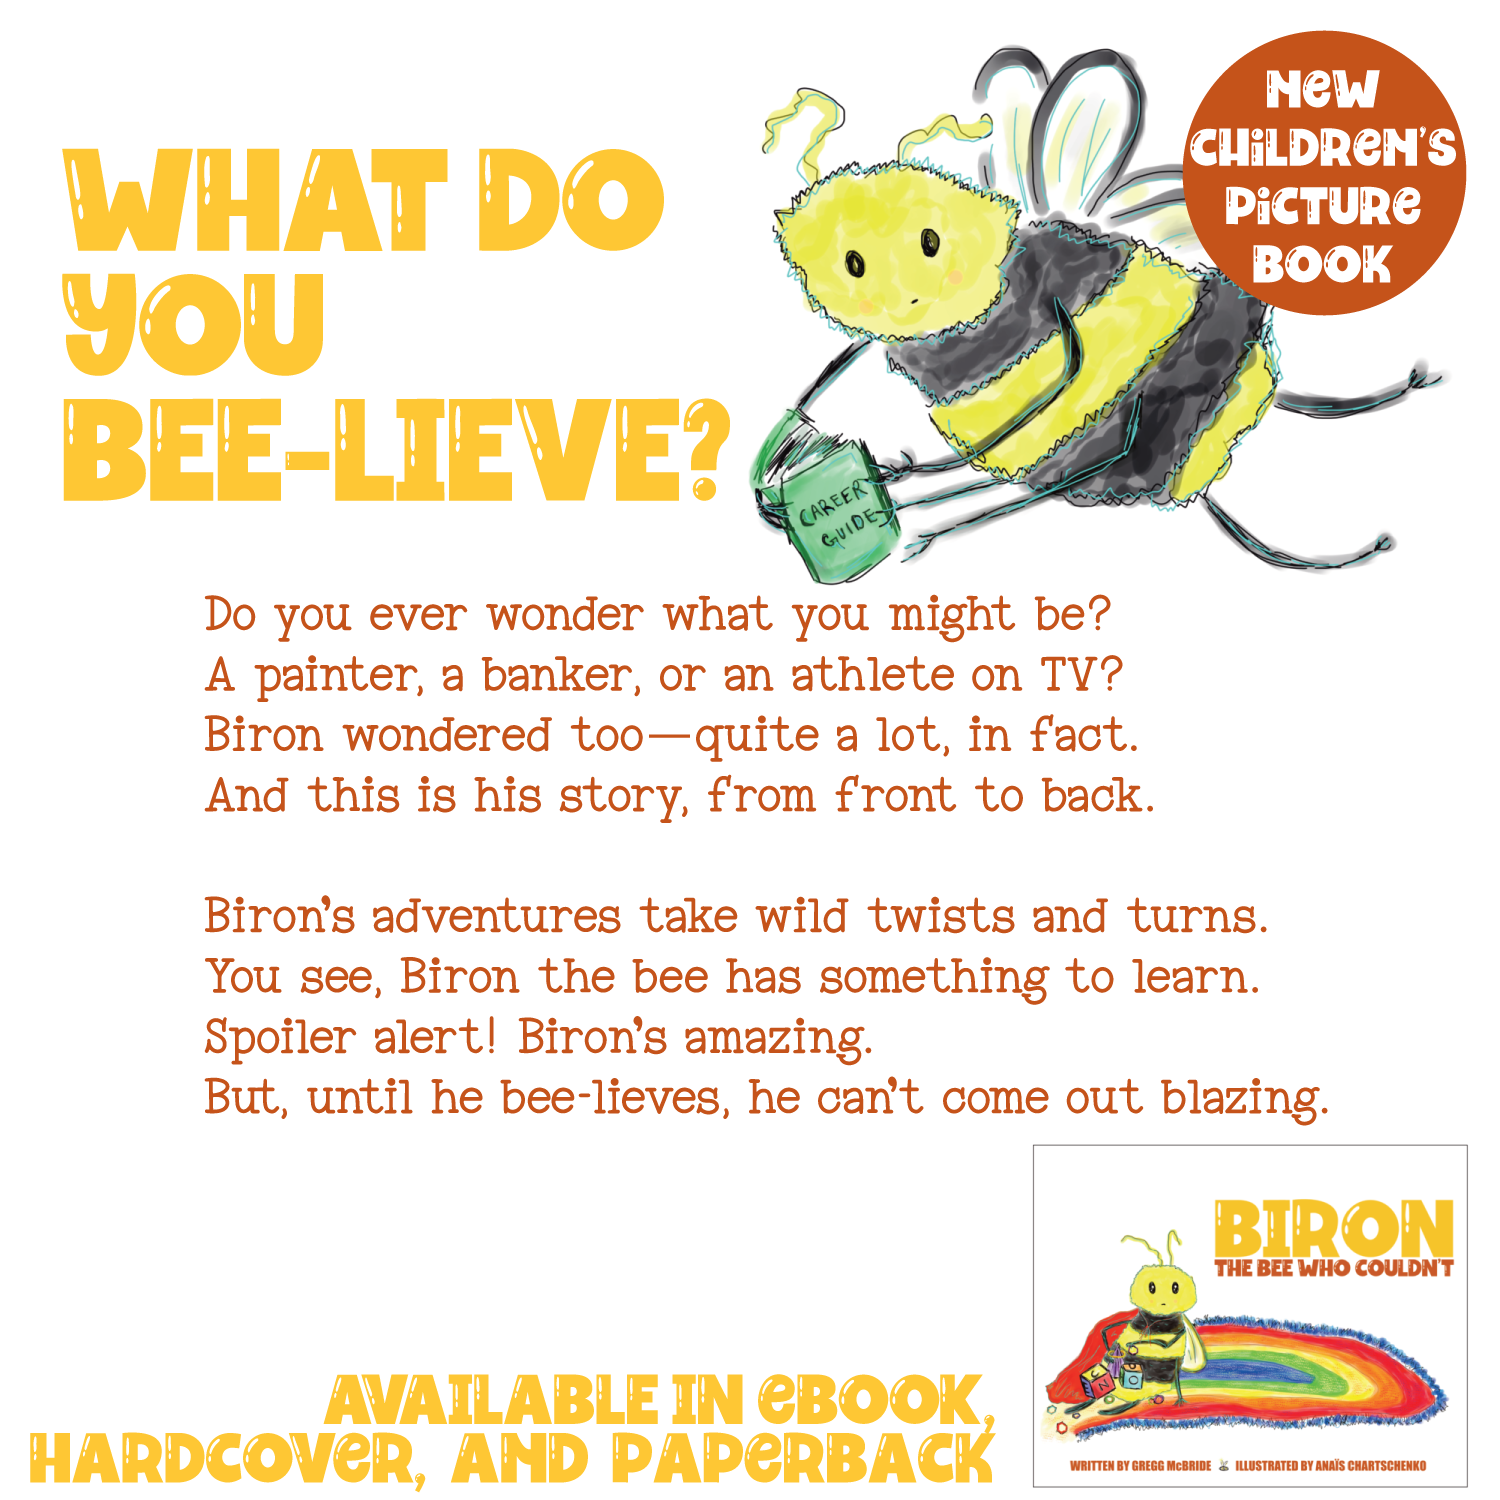 Biron the Bee: New Children's Picture Book